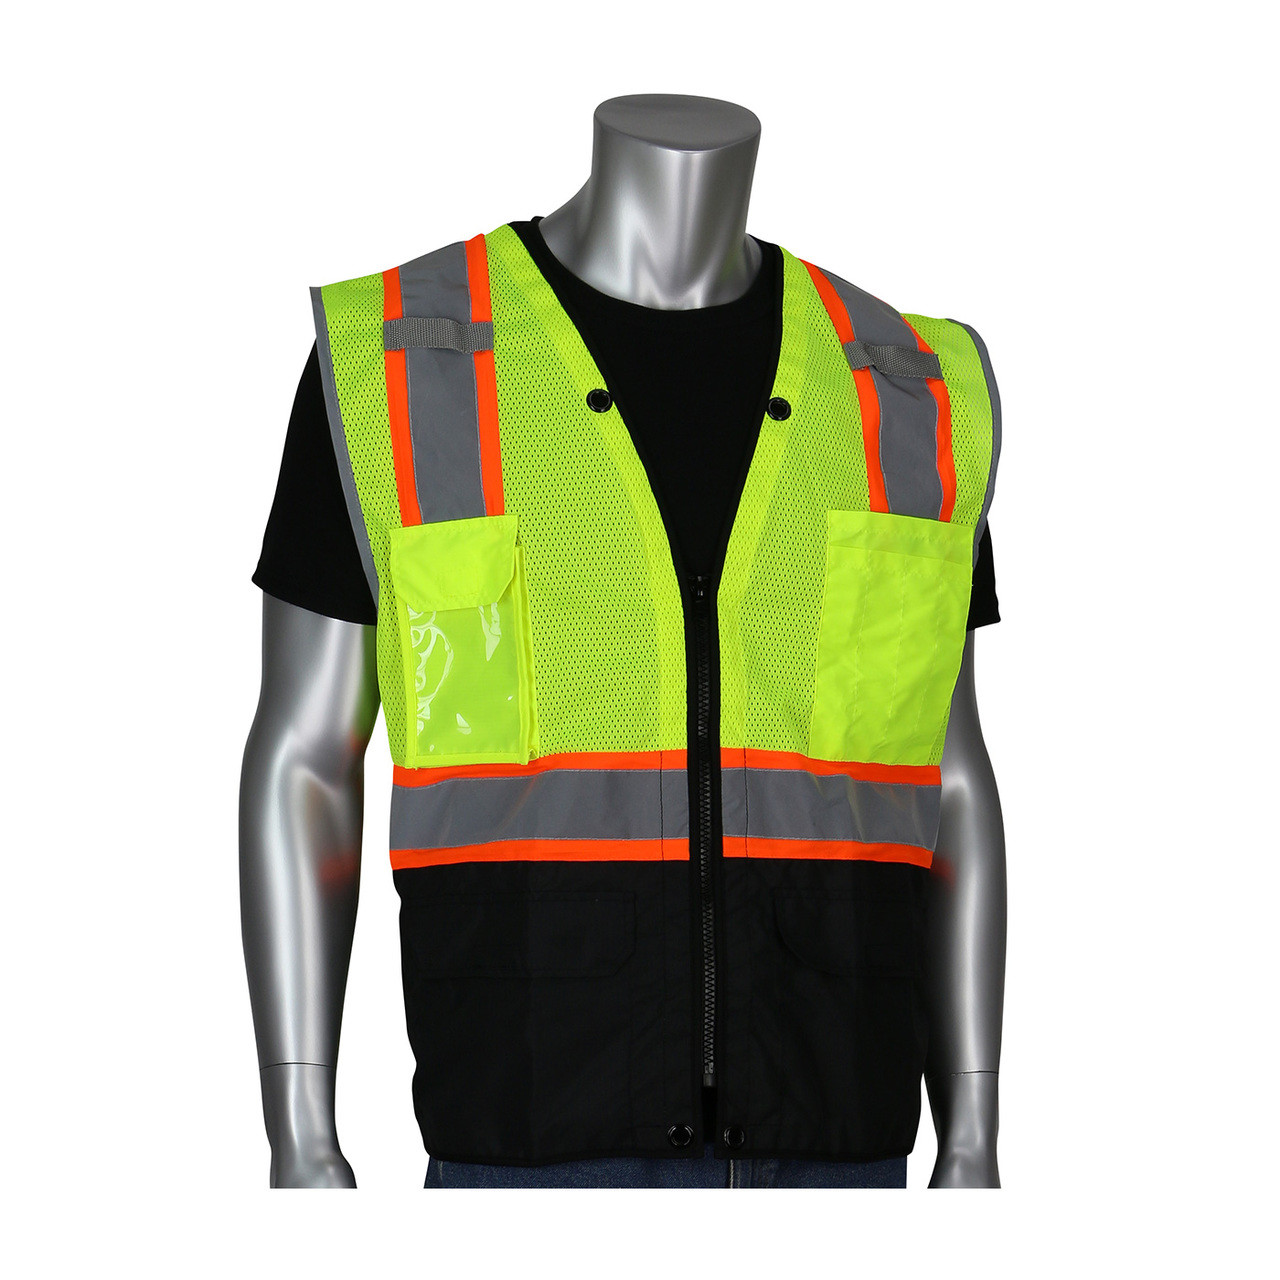 Surveyor Style Two Tone Mesh Safety Vest Class 3 with 4 Pockets ANSI/ISEA 107 